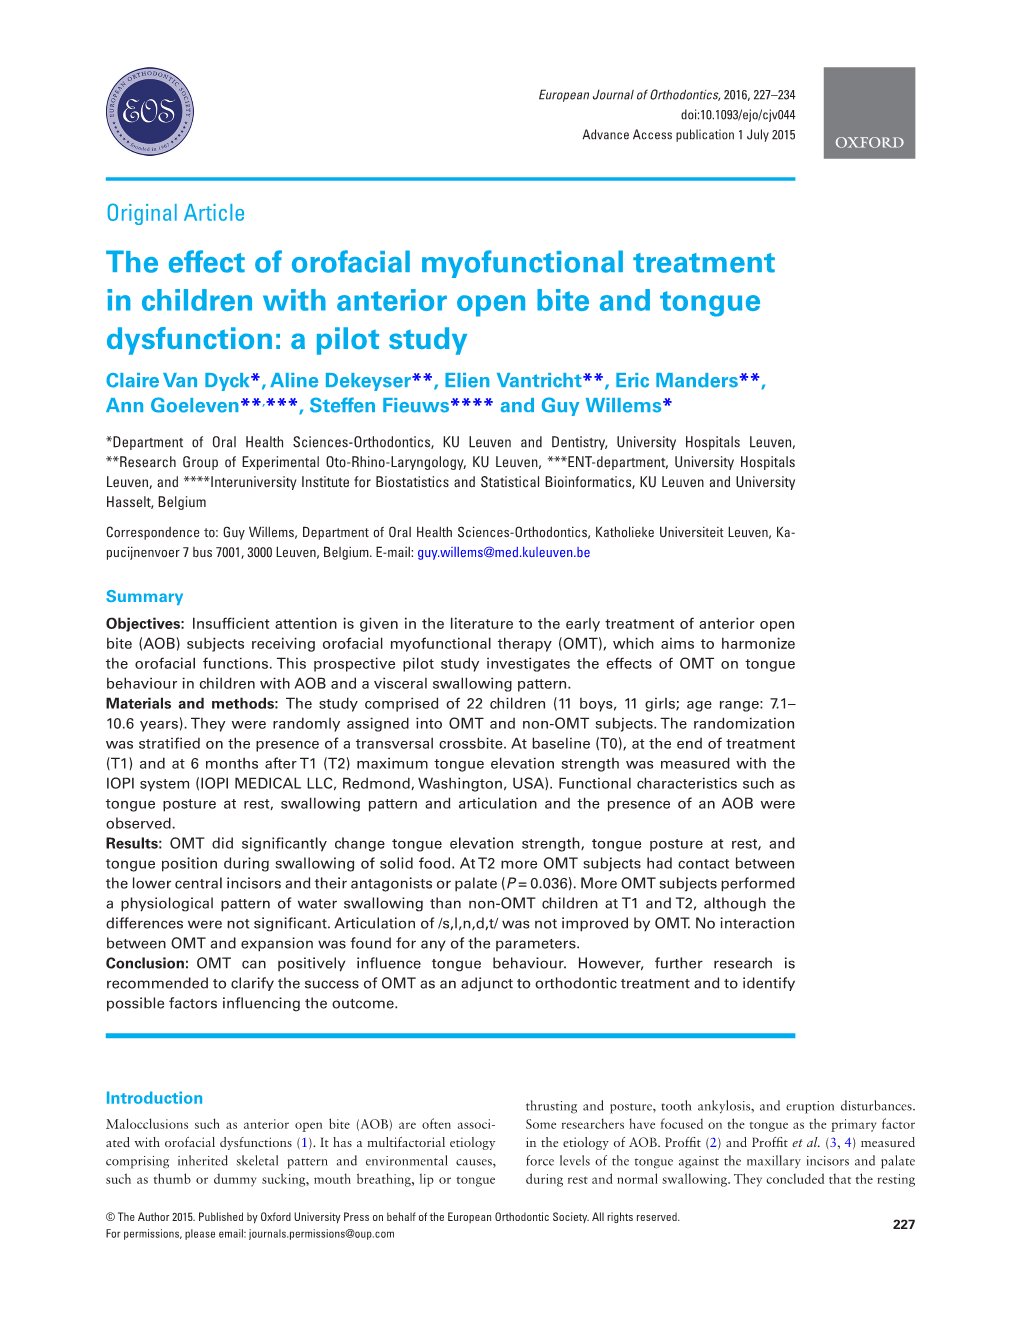 The Effect of Orofacial Myofunctional Treatment in Children with Anterior